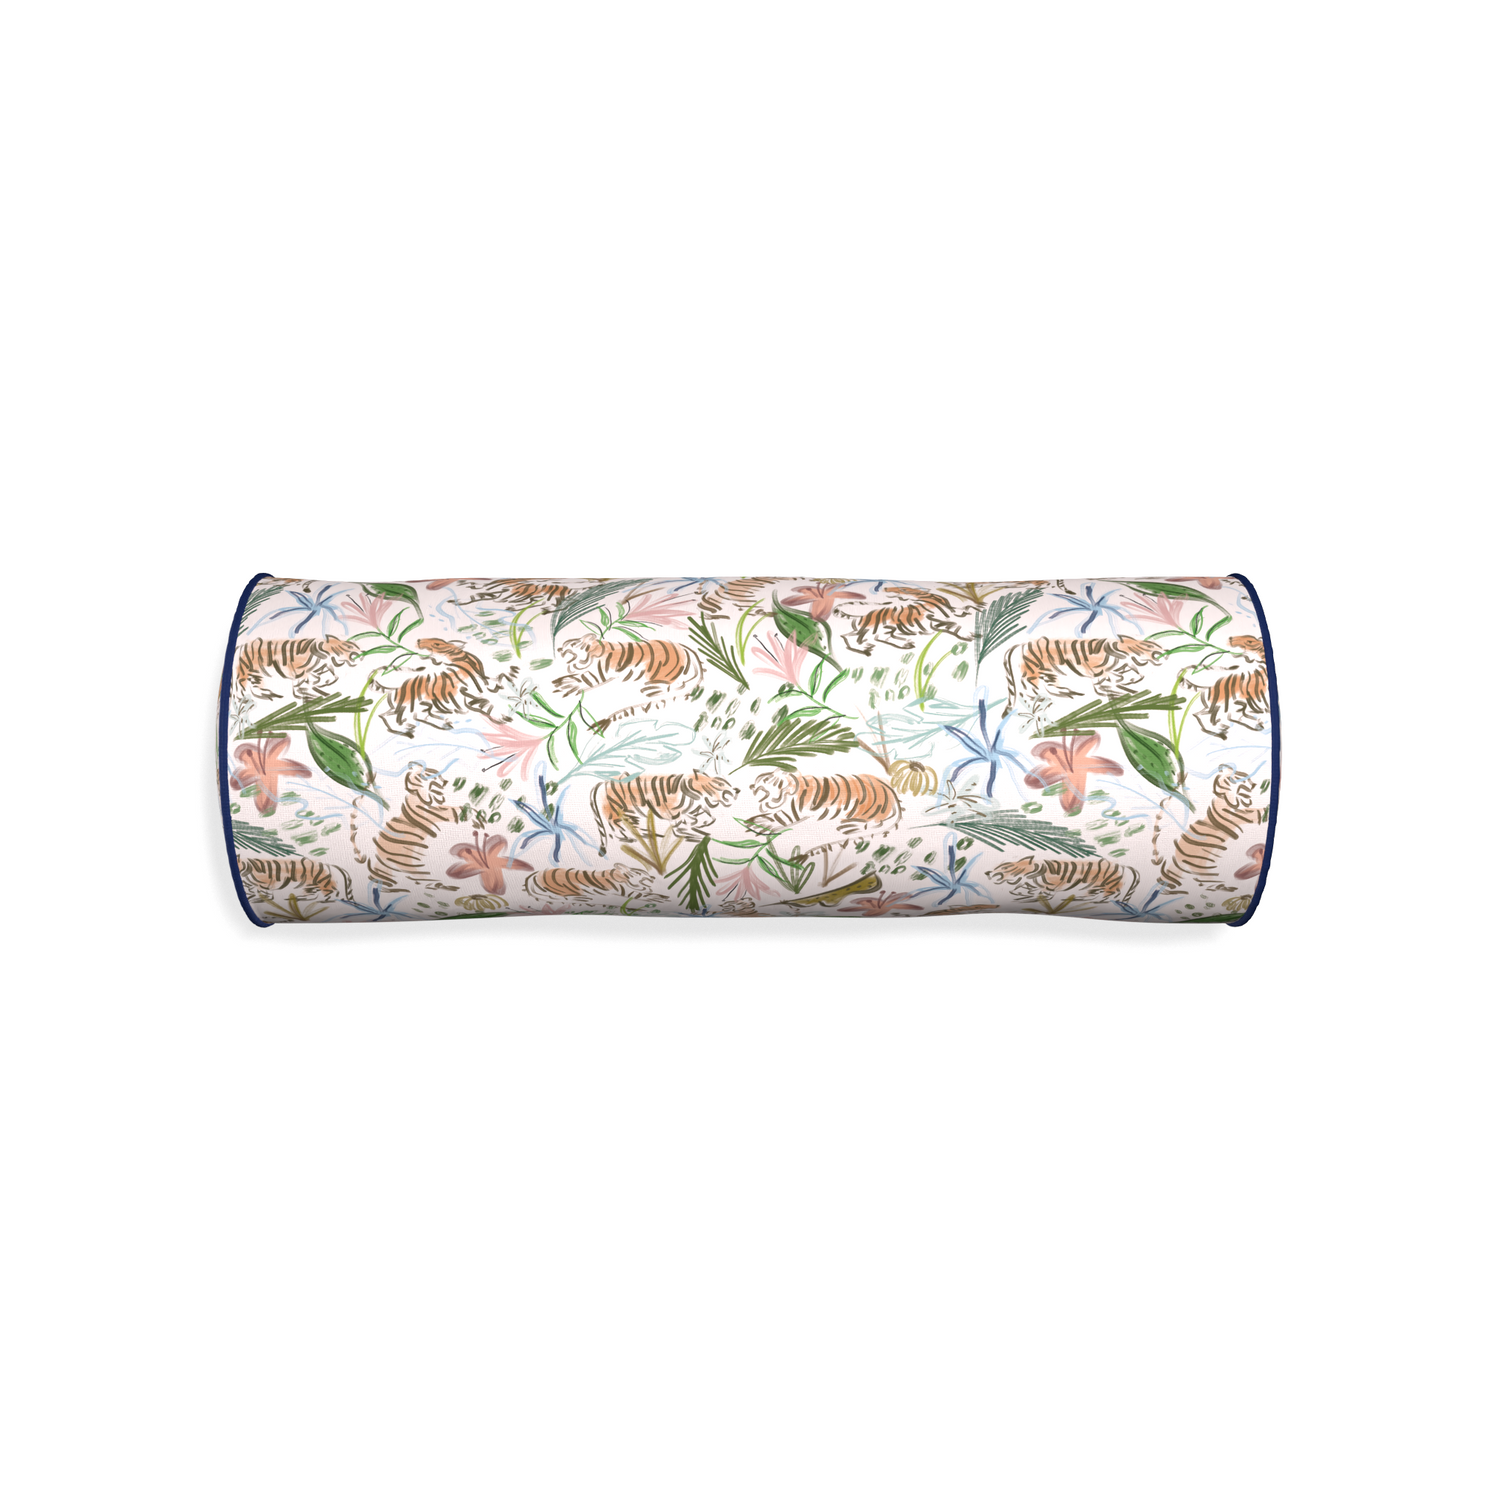 Bolster frida pink custom pink chinoiserie tigerpillow with midnight piping on white background